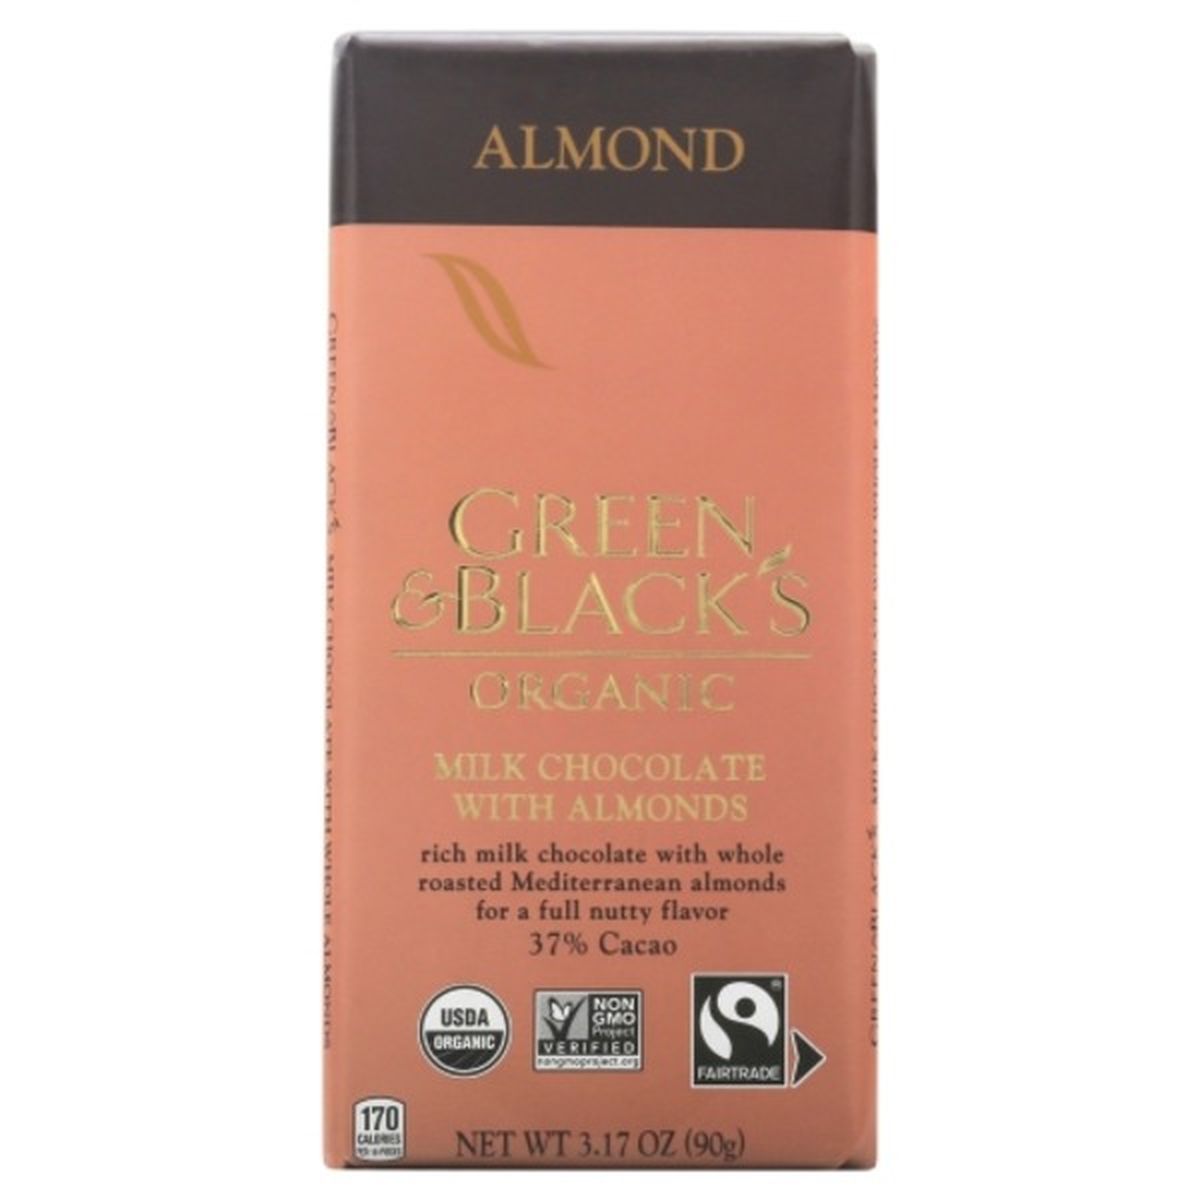 Calories in Green & Black's Milk Chocolate, with Almonds, Organic, 37% Cacao